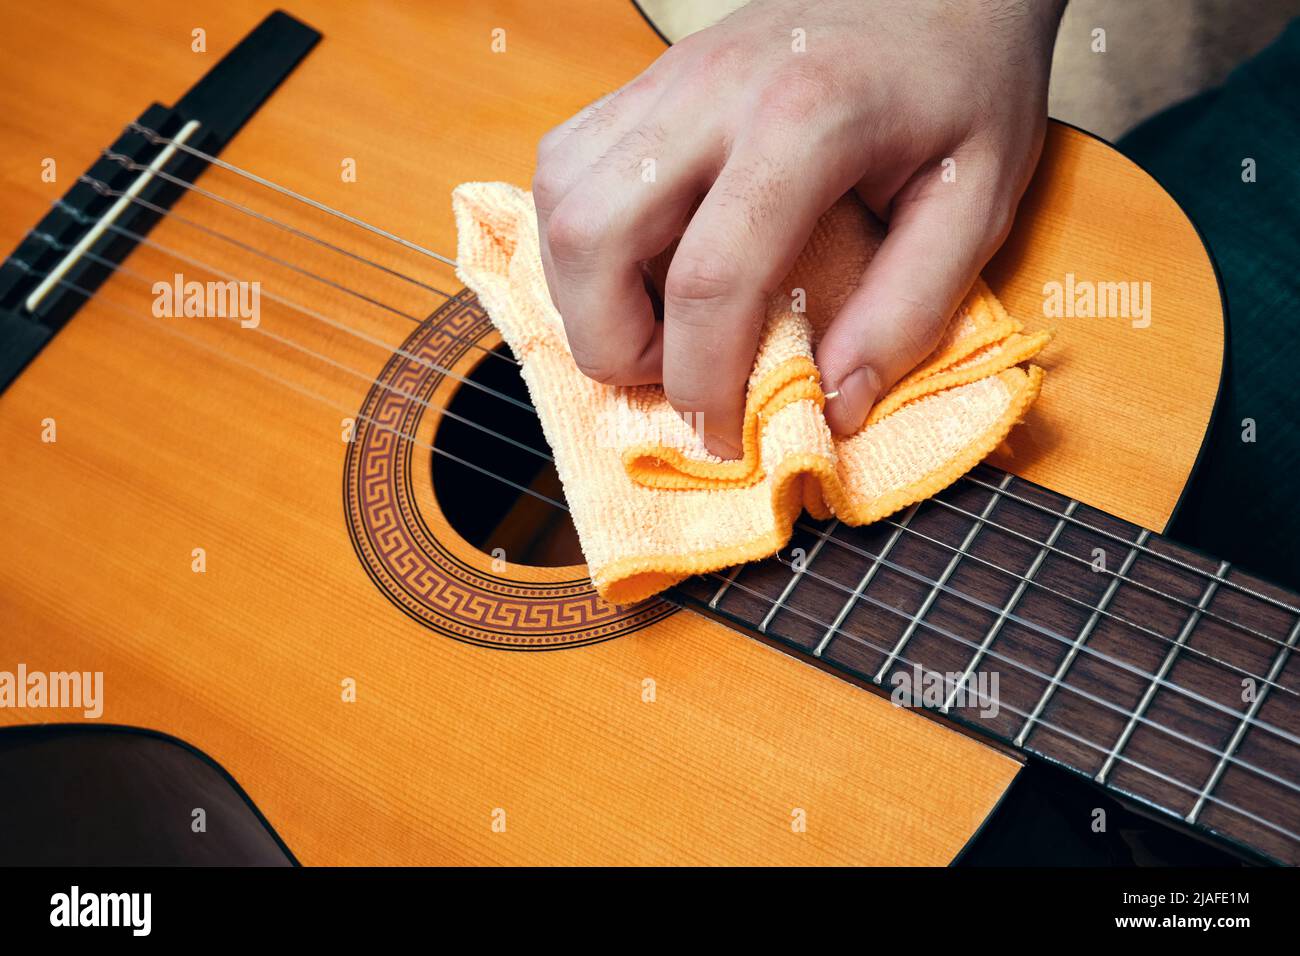 Musical instrument care. Guitar cleaning. Man cleaning a guitar Stock Photo